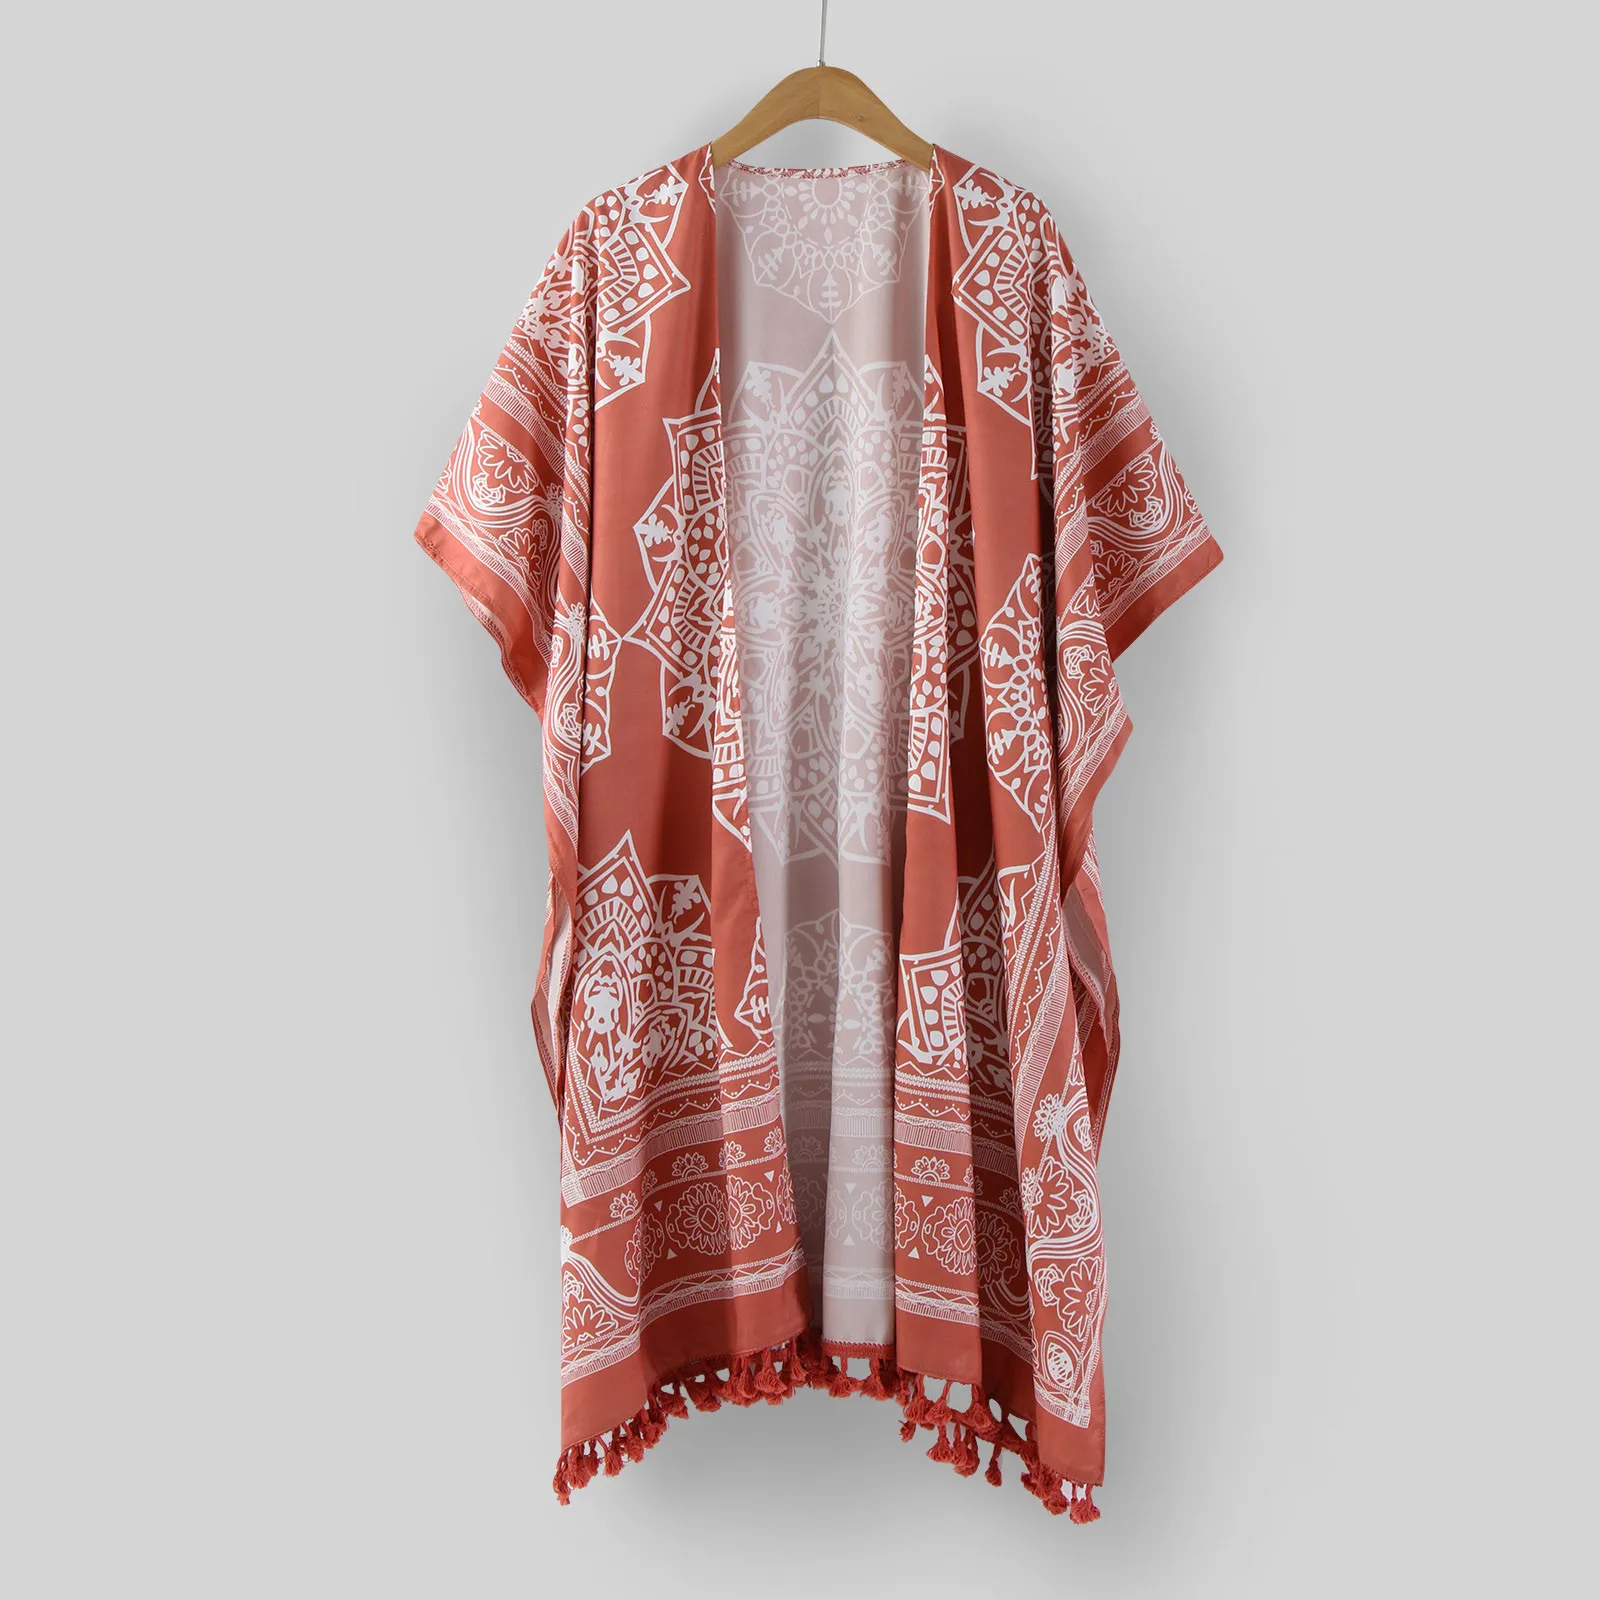 Bohemian Vintage Floral Print Woman Long Kimono Shirt Ethnic Loose Cardigan Tops Holiday Sunscreen Blouses Women Outer Cover bathing suit wrap cover up